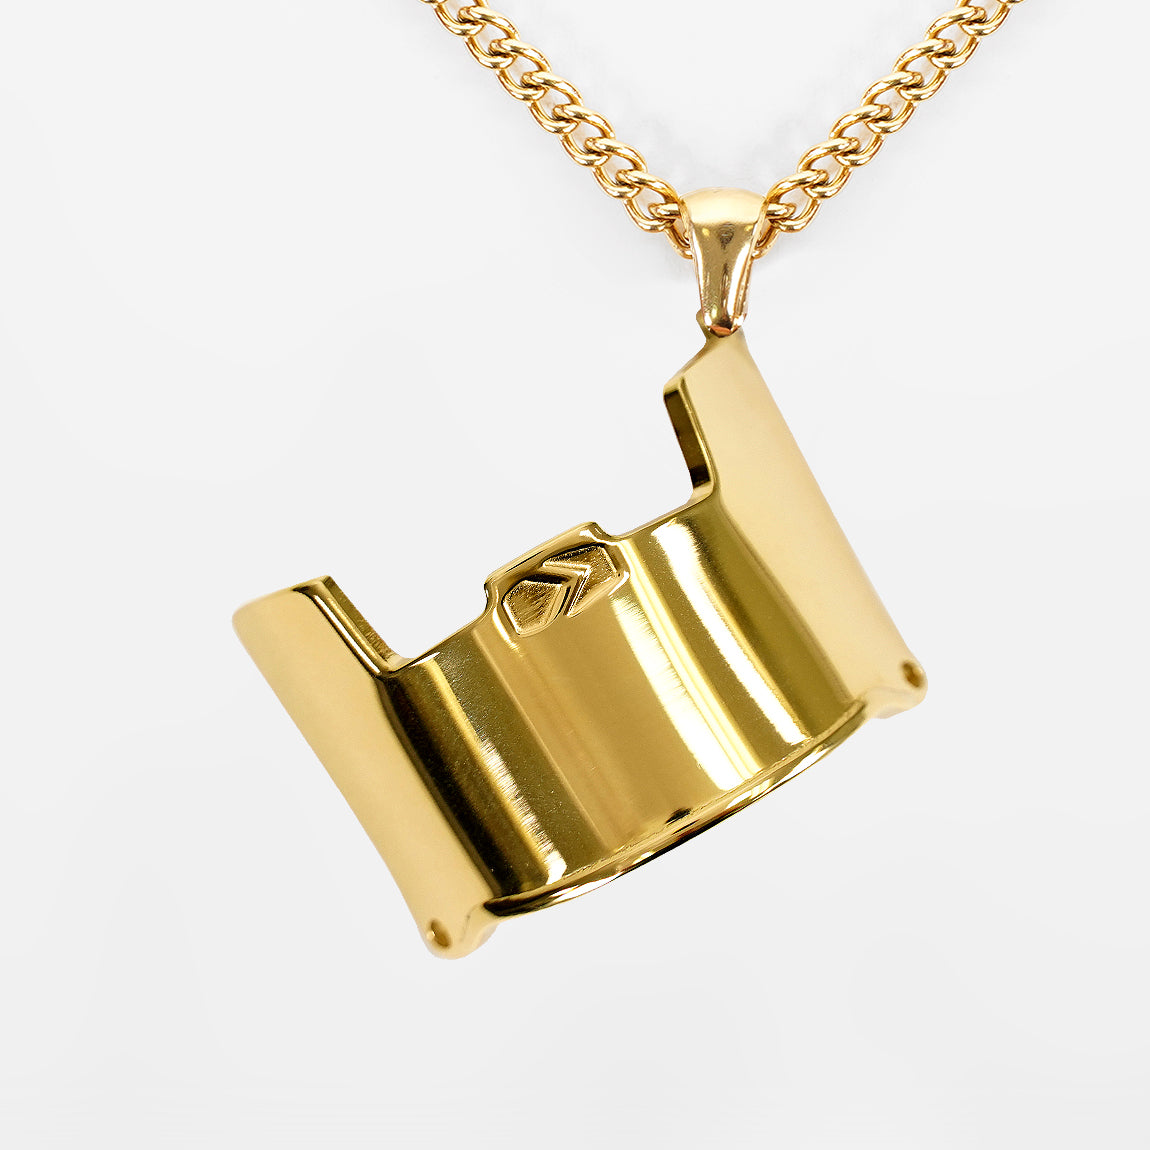 Helmet Visor Pendant with Chain Necklace - Gold Plated Stainless Steel